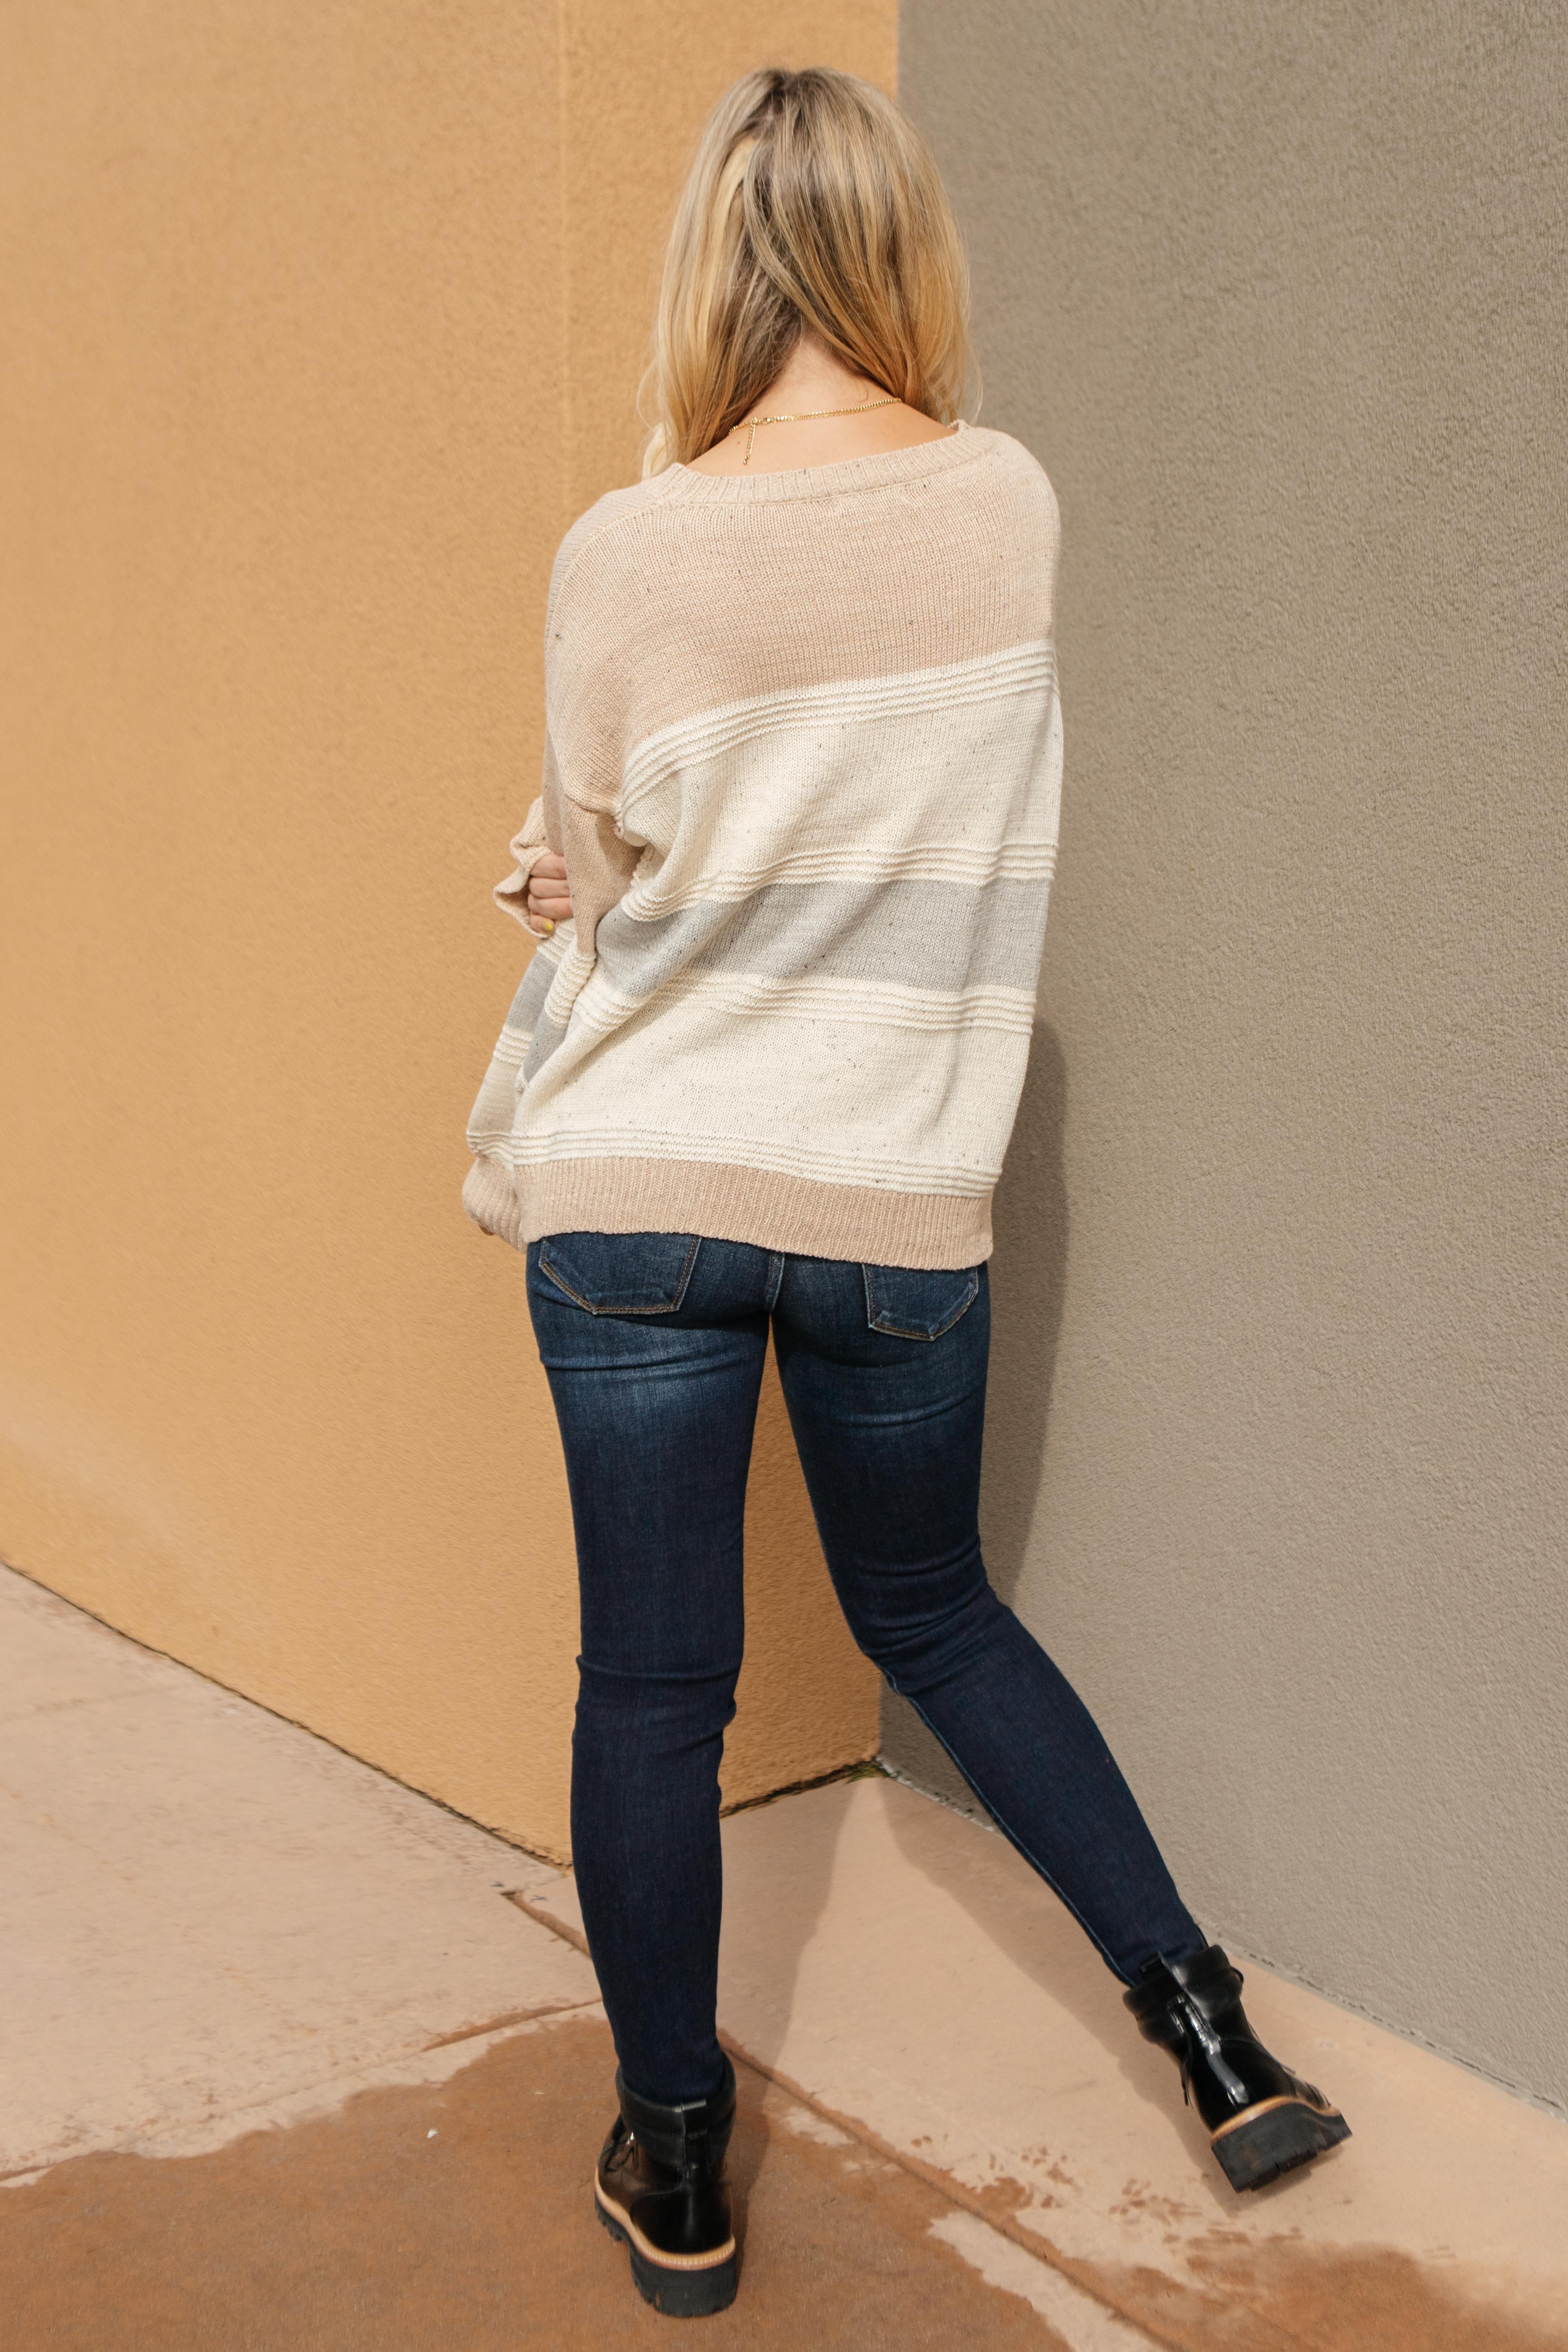 Muted Tones Striped Top